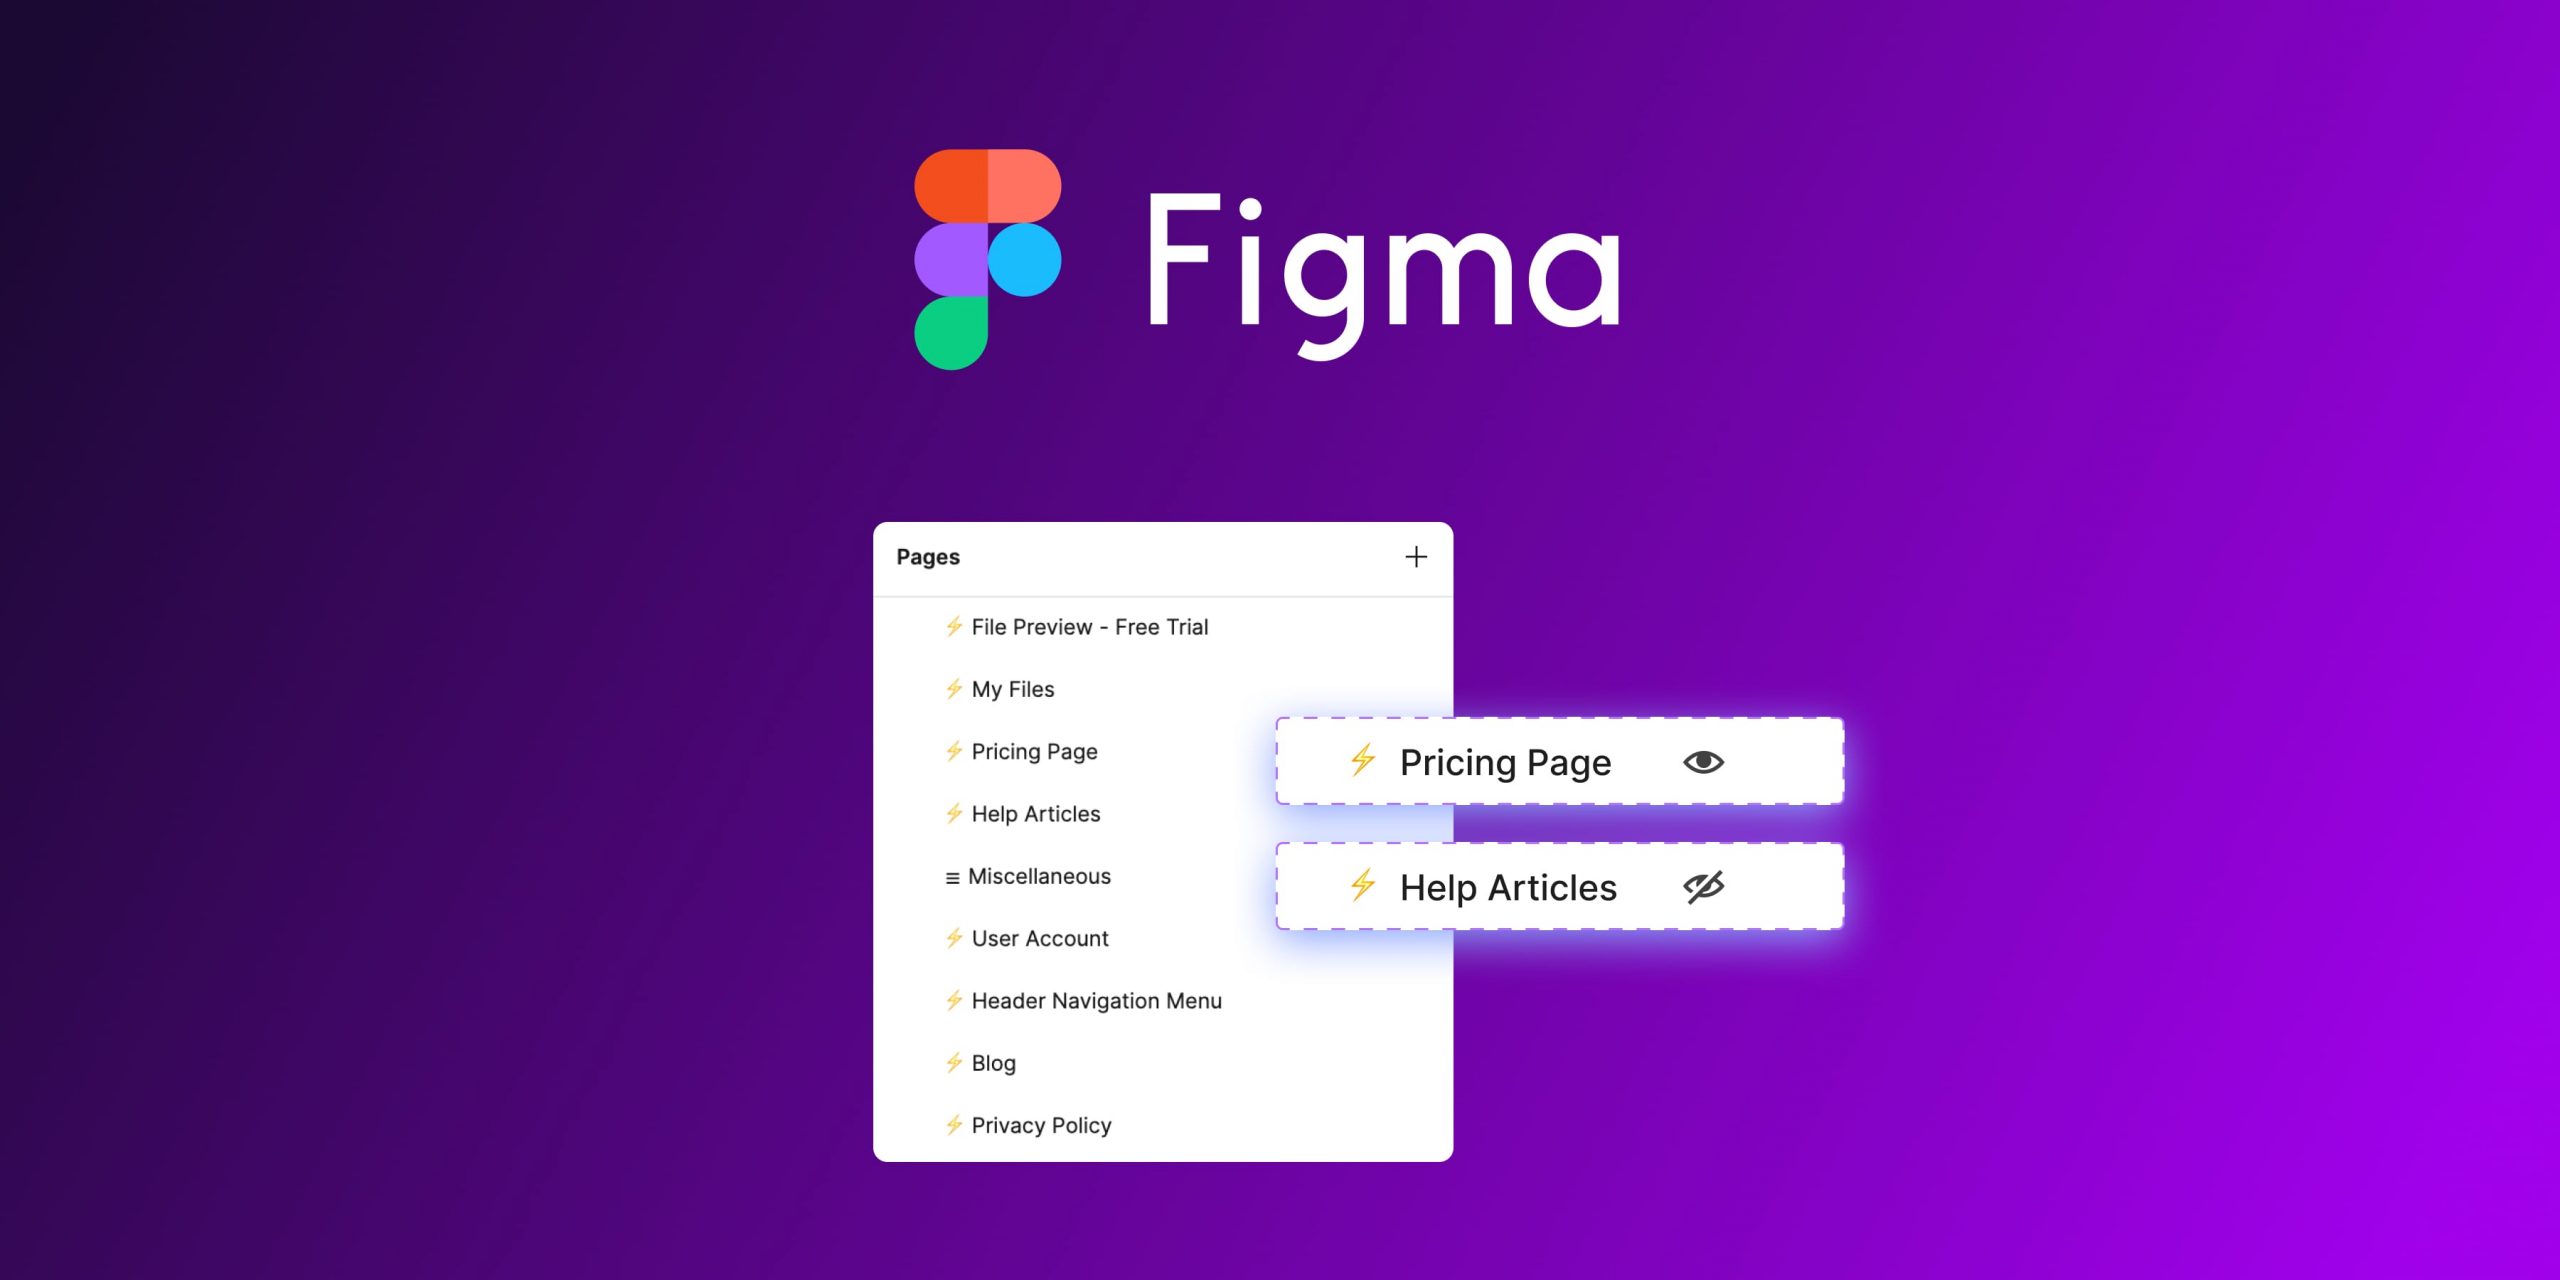 Share individual Figma pages with Magicul Monocle